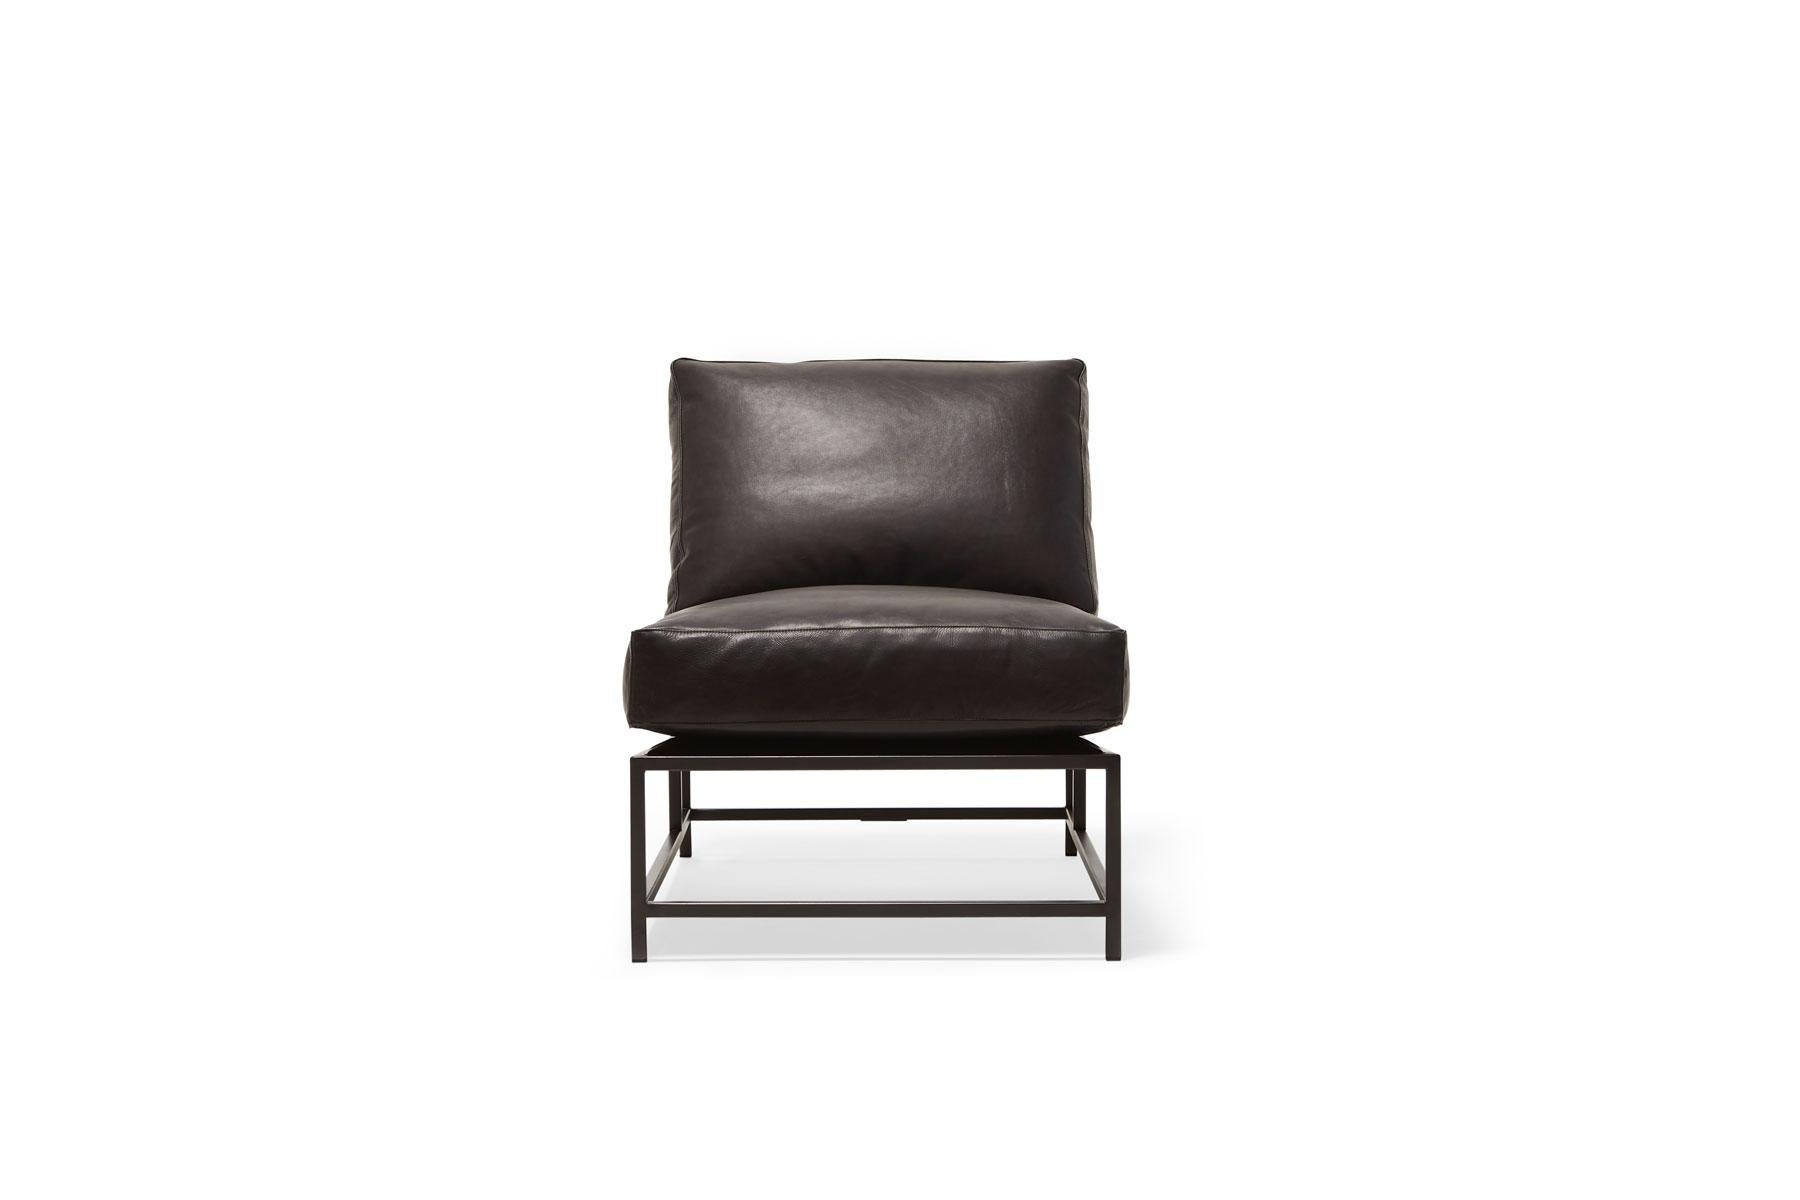 Sleek and refined, the Inheritance Collection Chair by Stephen Kenn is a great addition to nearly any space. 

This chair is upholstered in a rich black leather from the Moore & Giles Harness collection. The foam seat cushion has been wrapped in